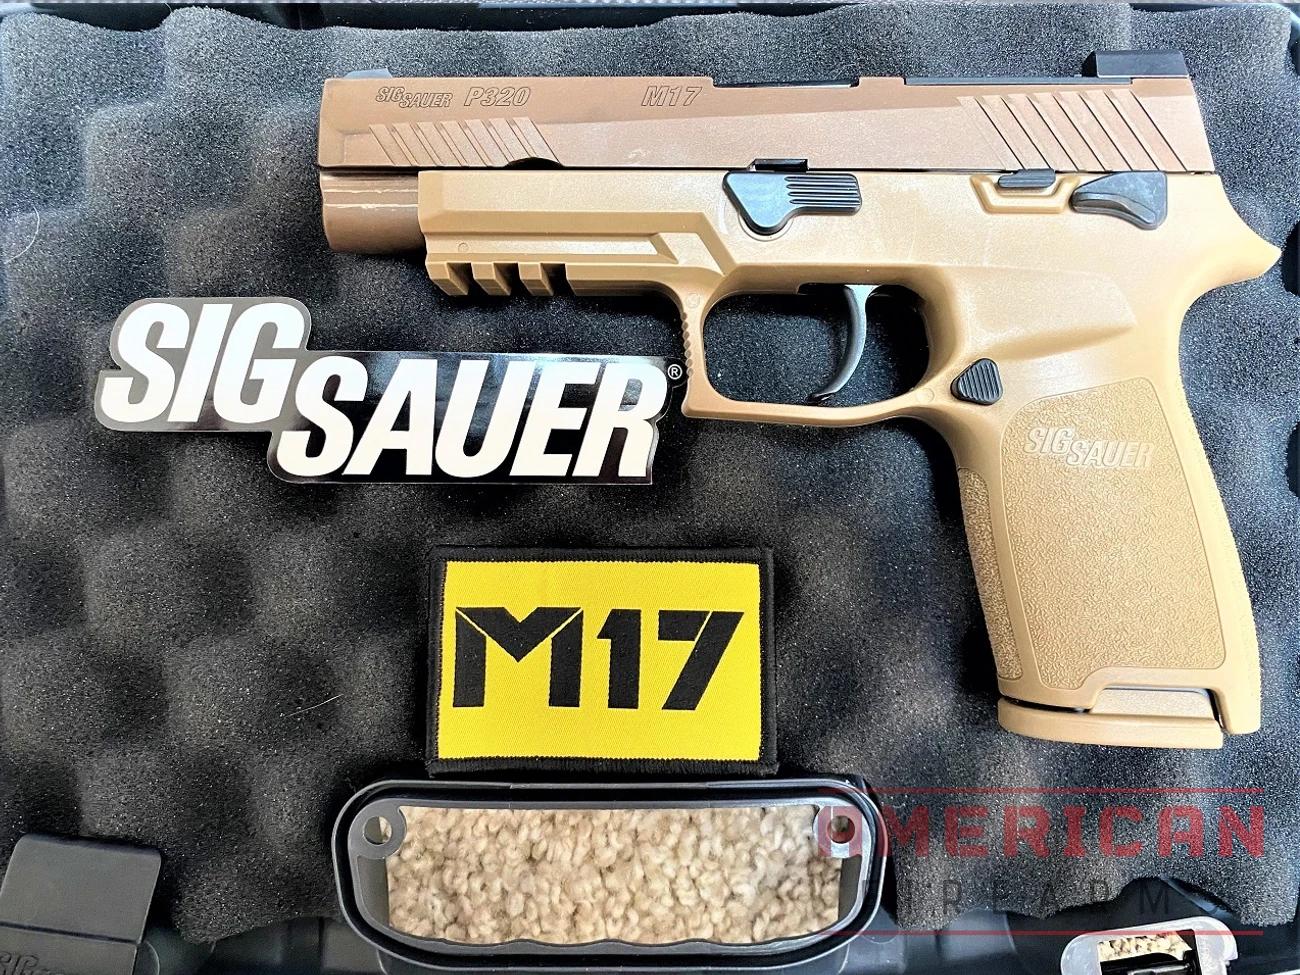 The M17 and its case